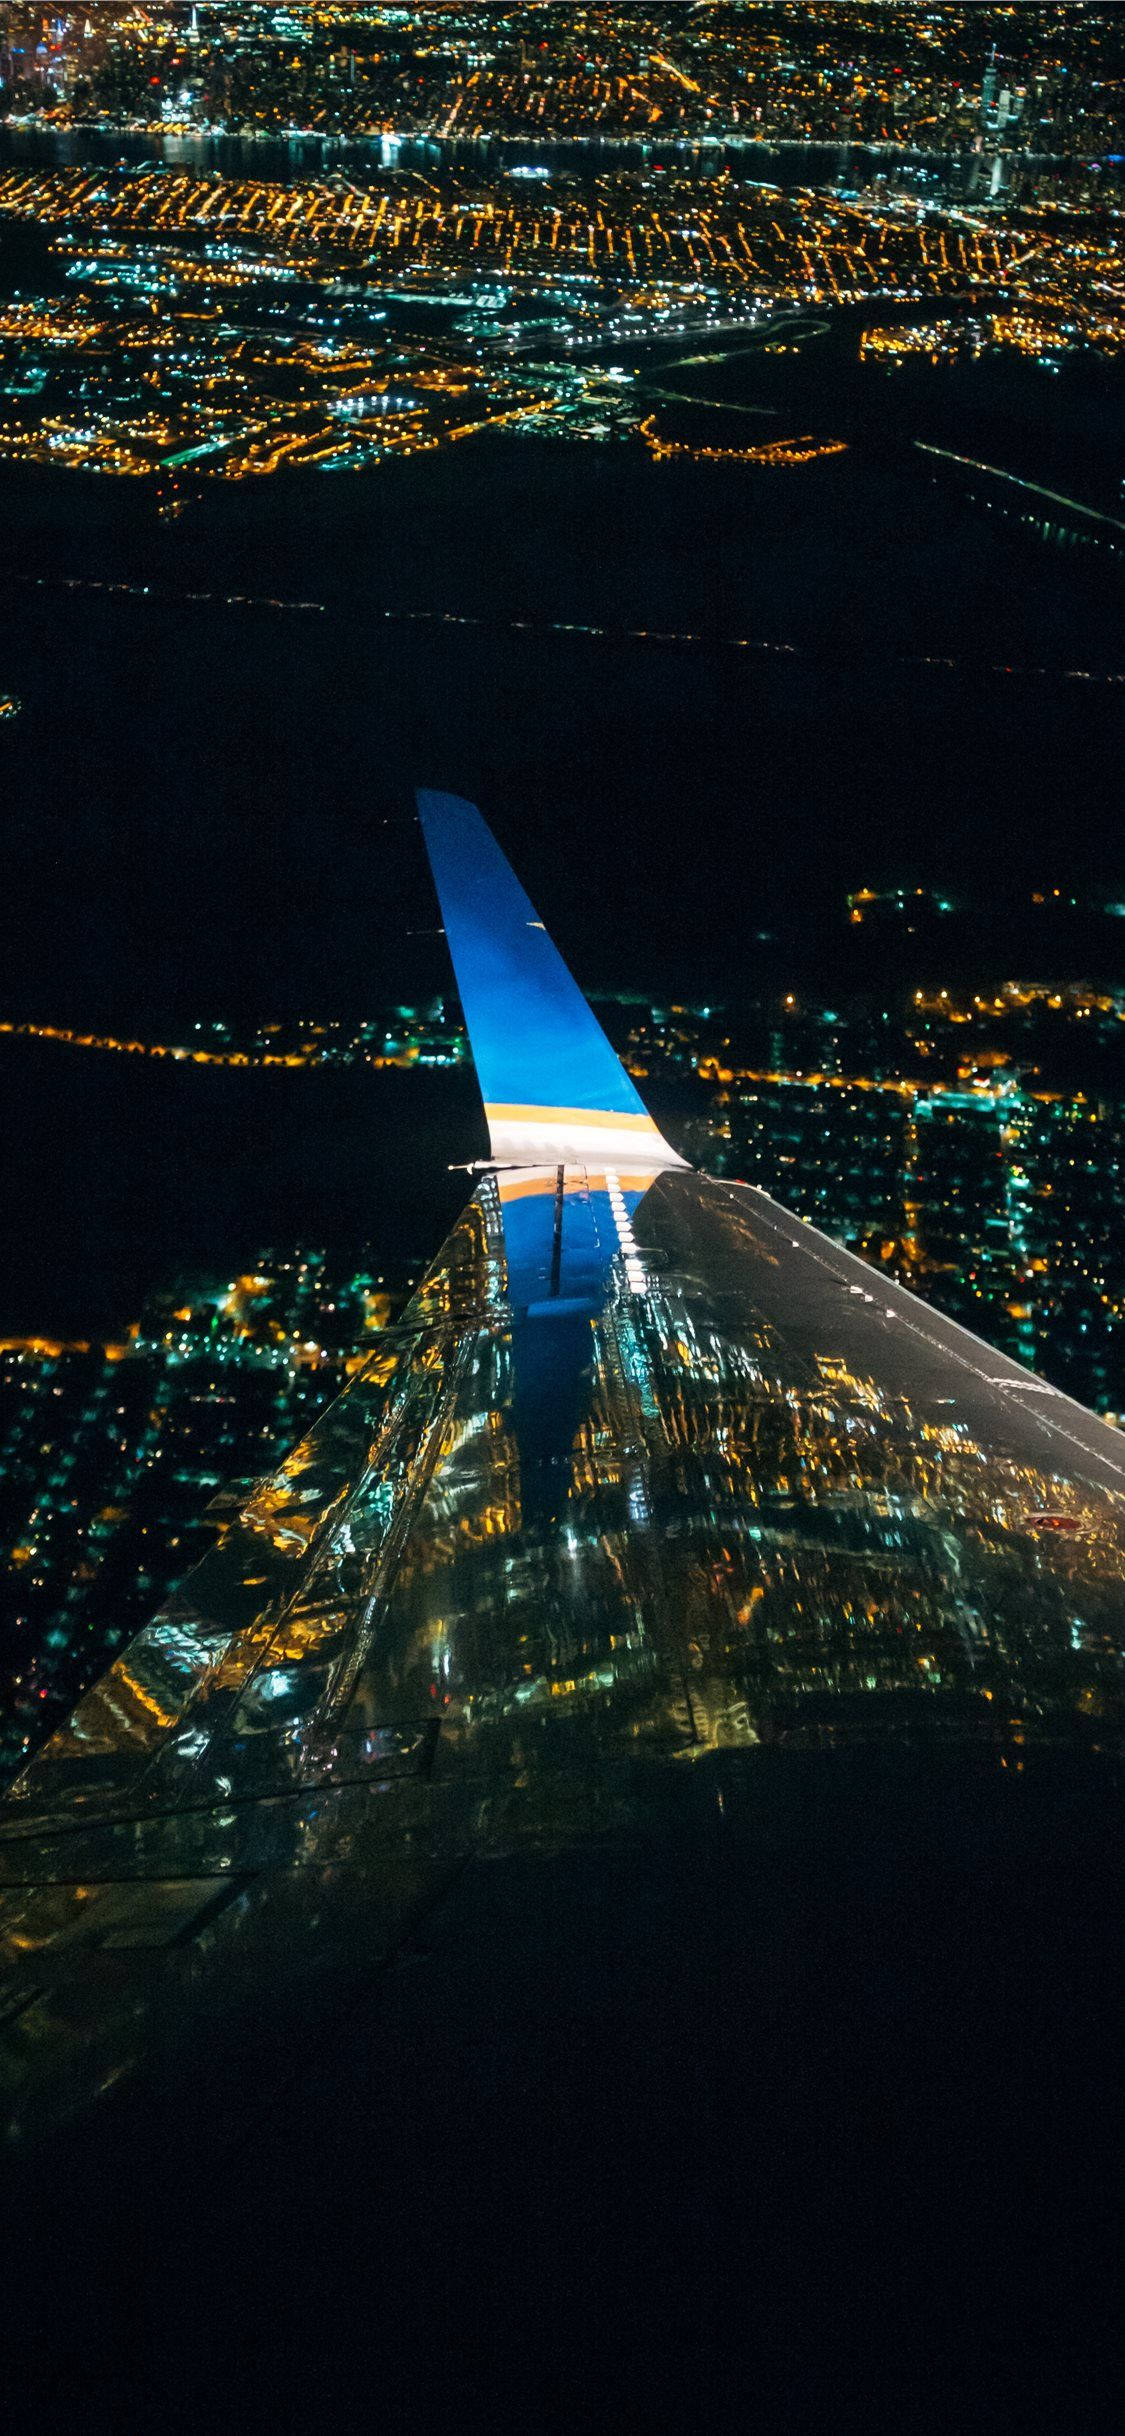 Night View Of Flying Airplane Android